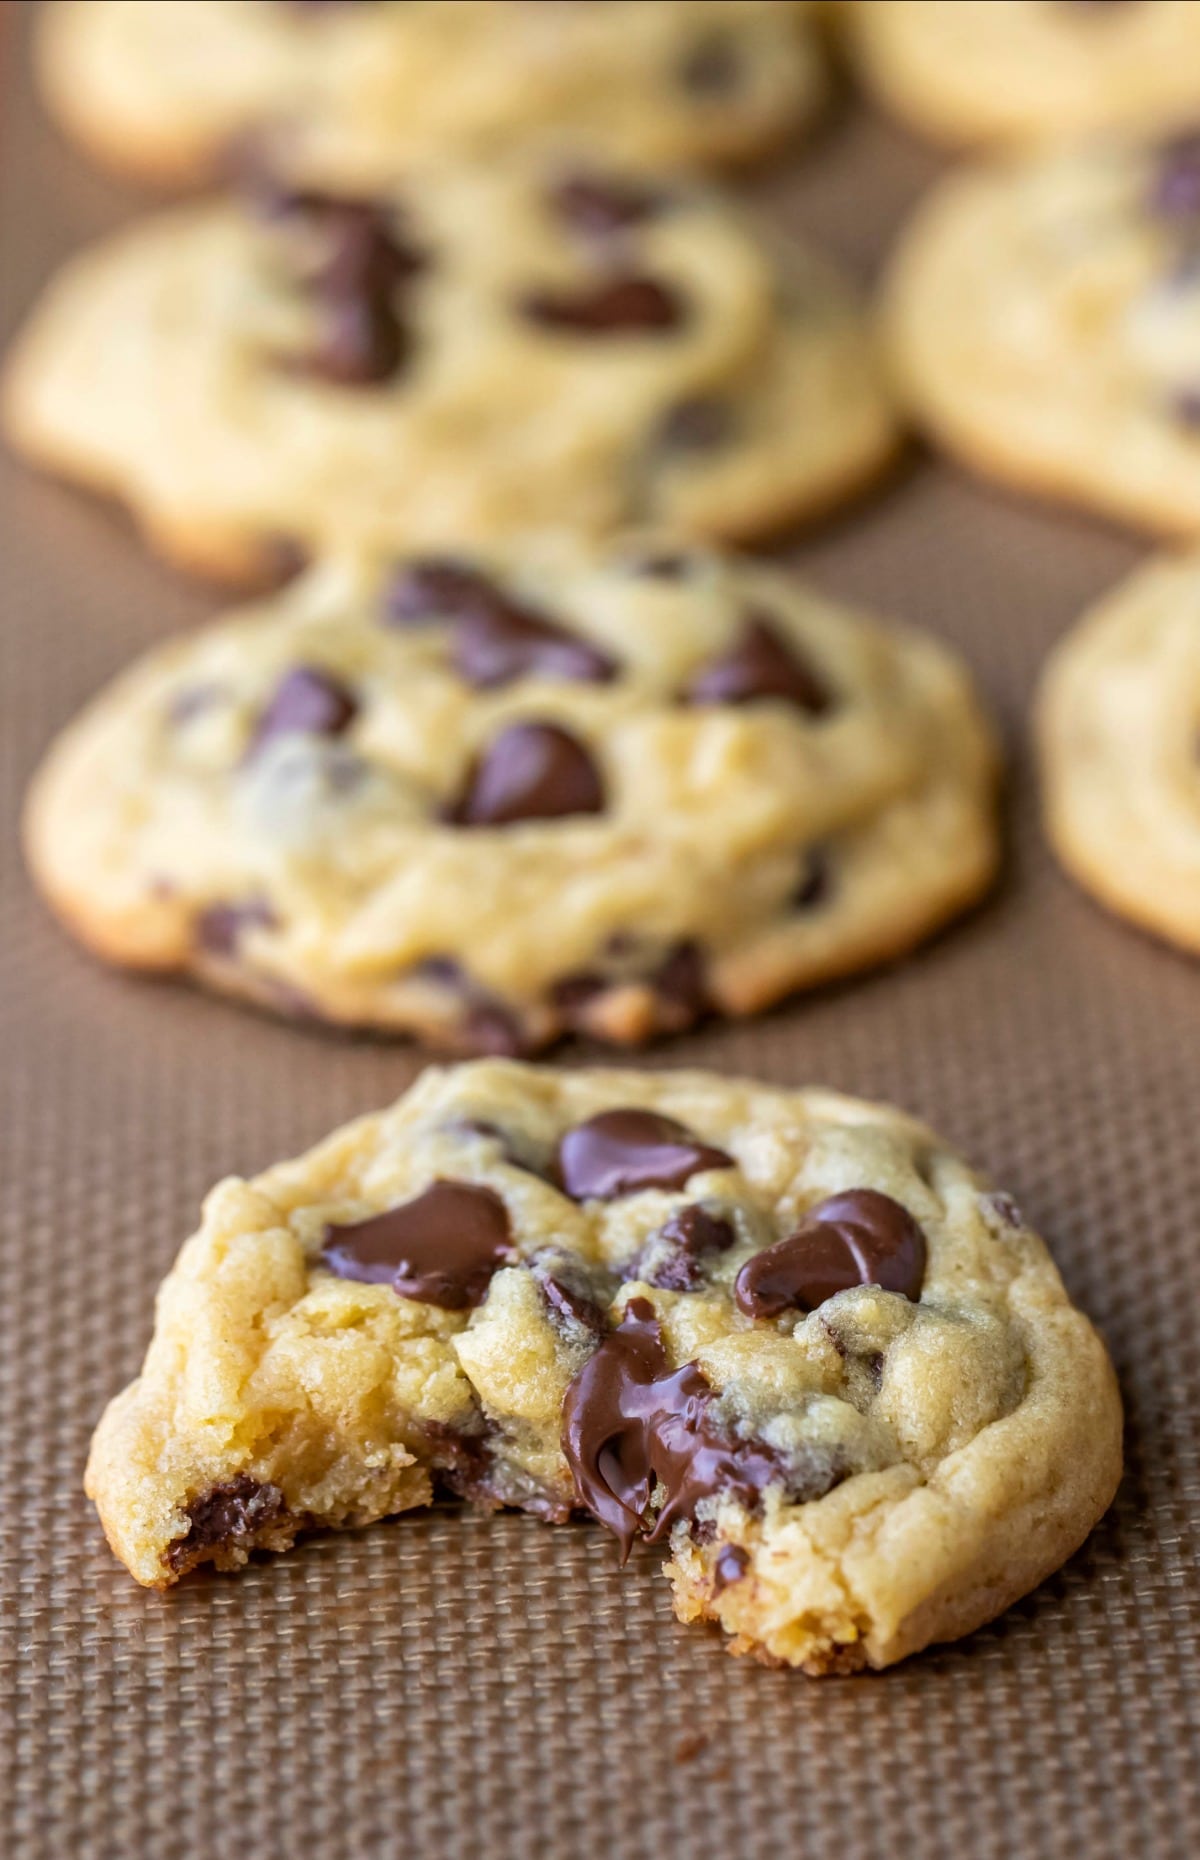 Chocolate chip pudding cookie with a bite out of it